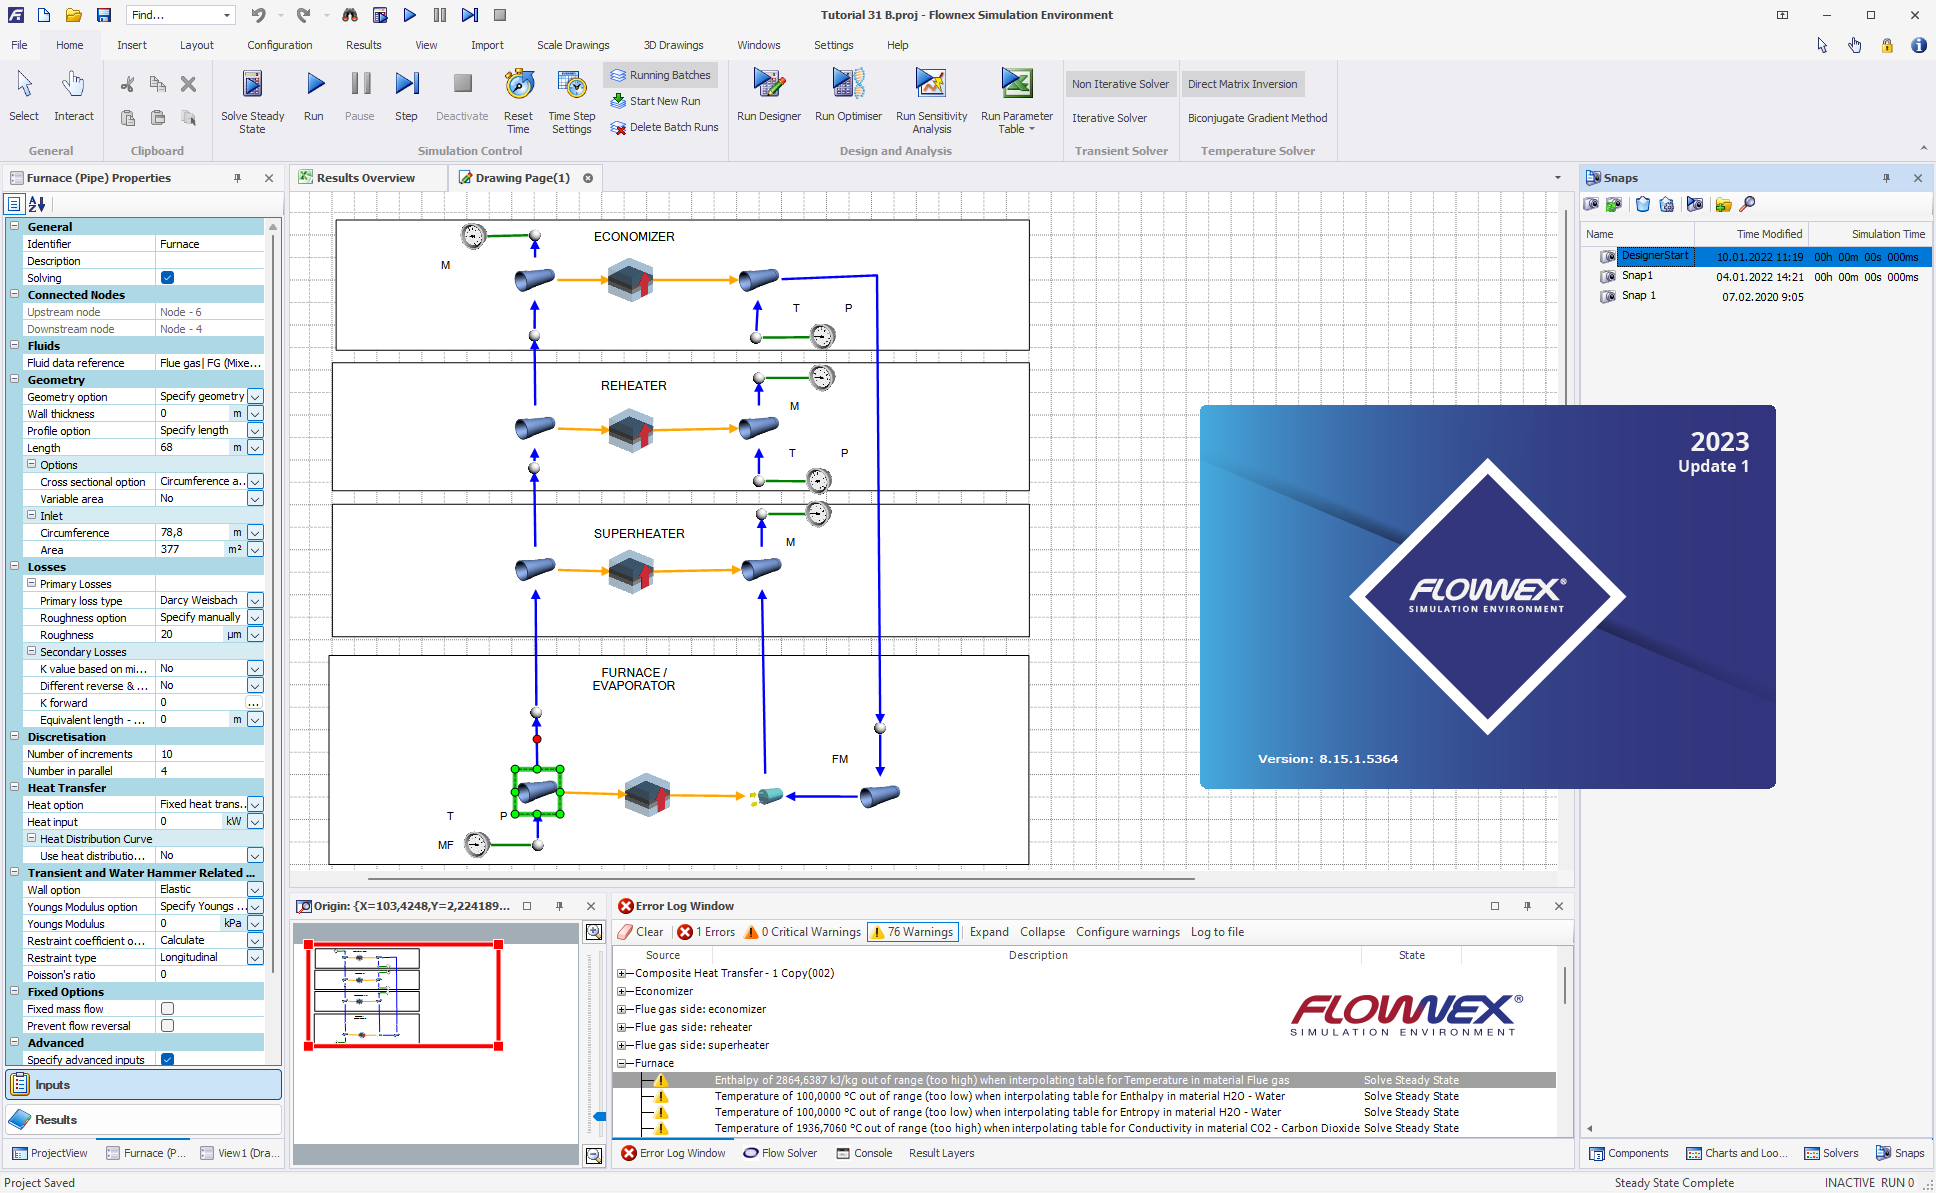 Working with Flownex Simulation Environment 2023.1 v8.15.1.5364 full license